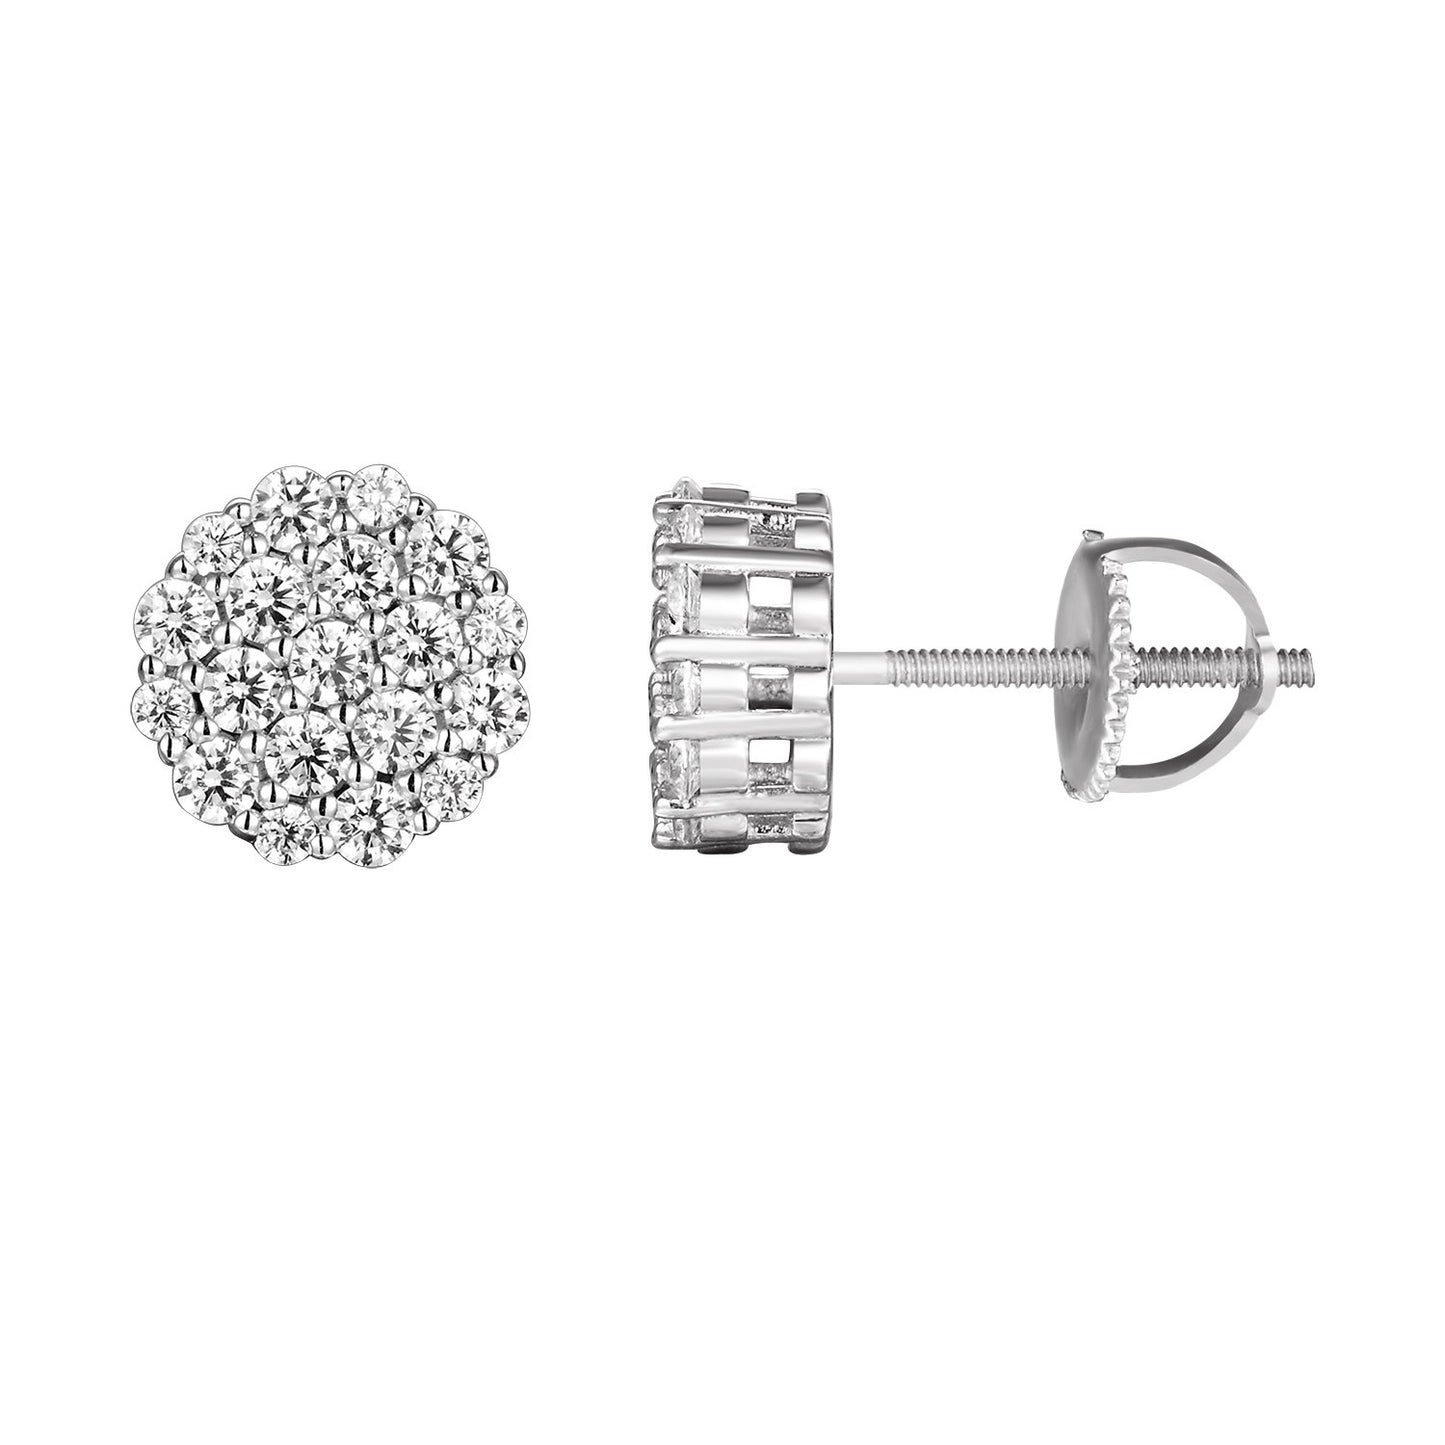 Sterling Silver Bling Prong Solitaire Screw Back Earrings